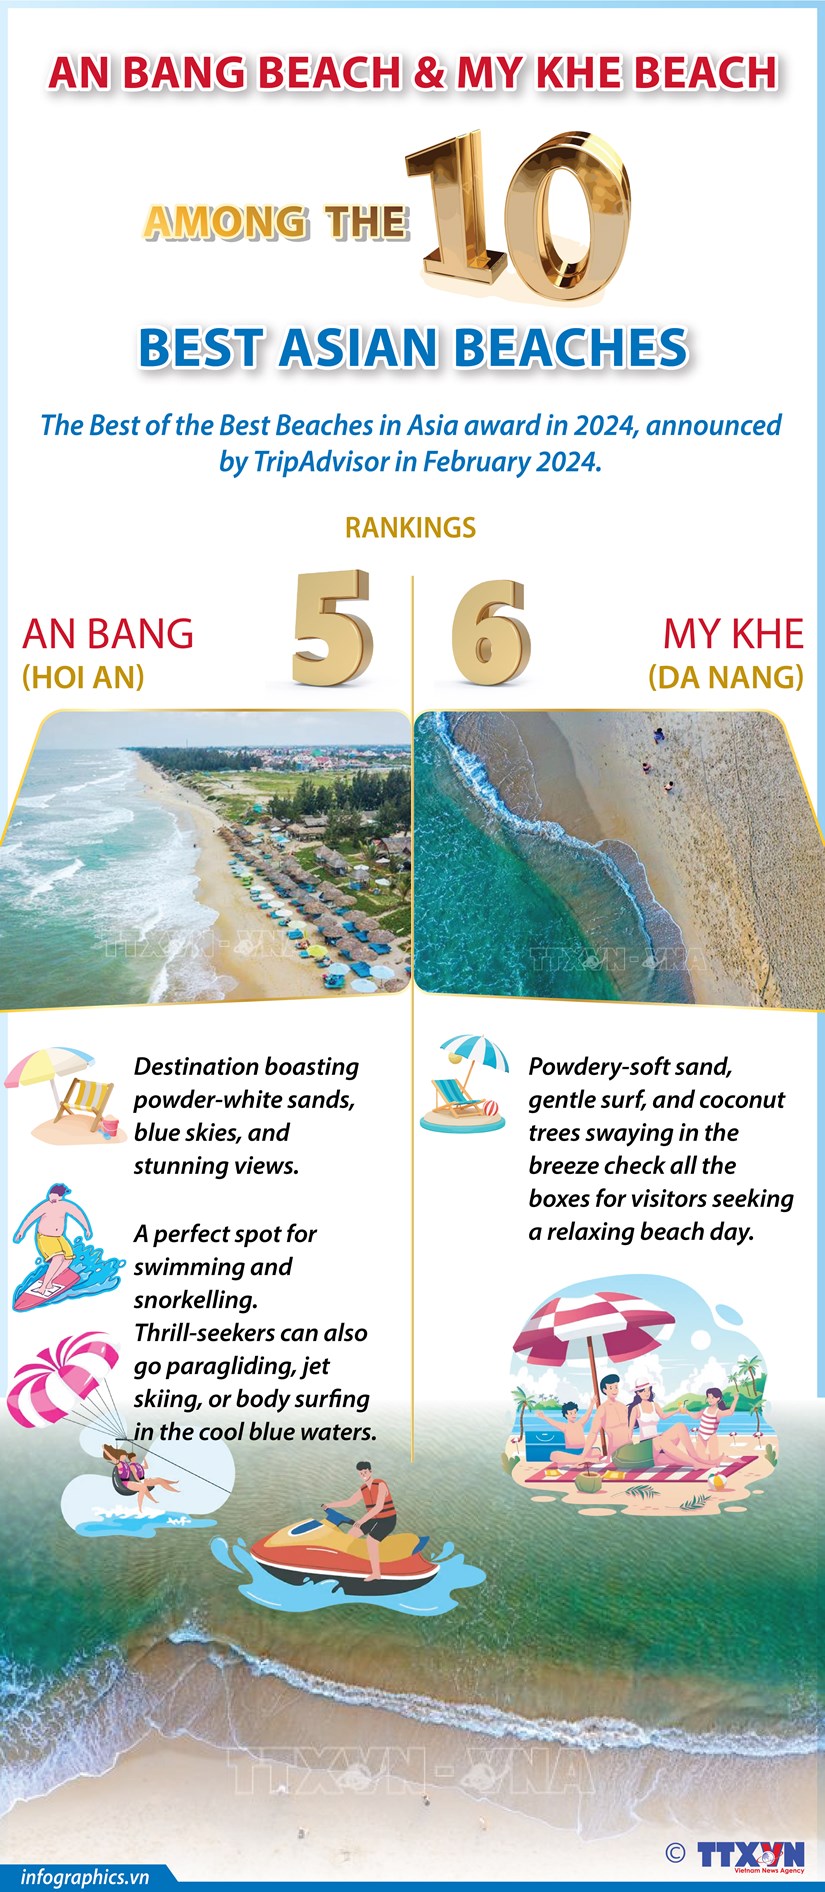 Two Vietnamese beaches among top 10 in Asia hinh anh 1